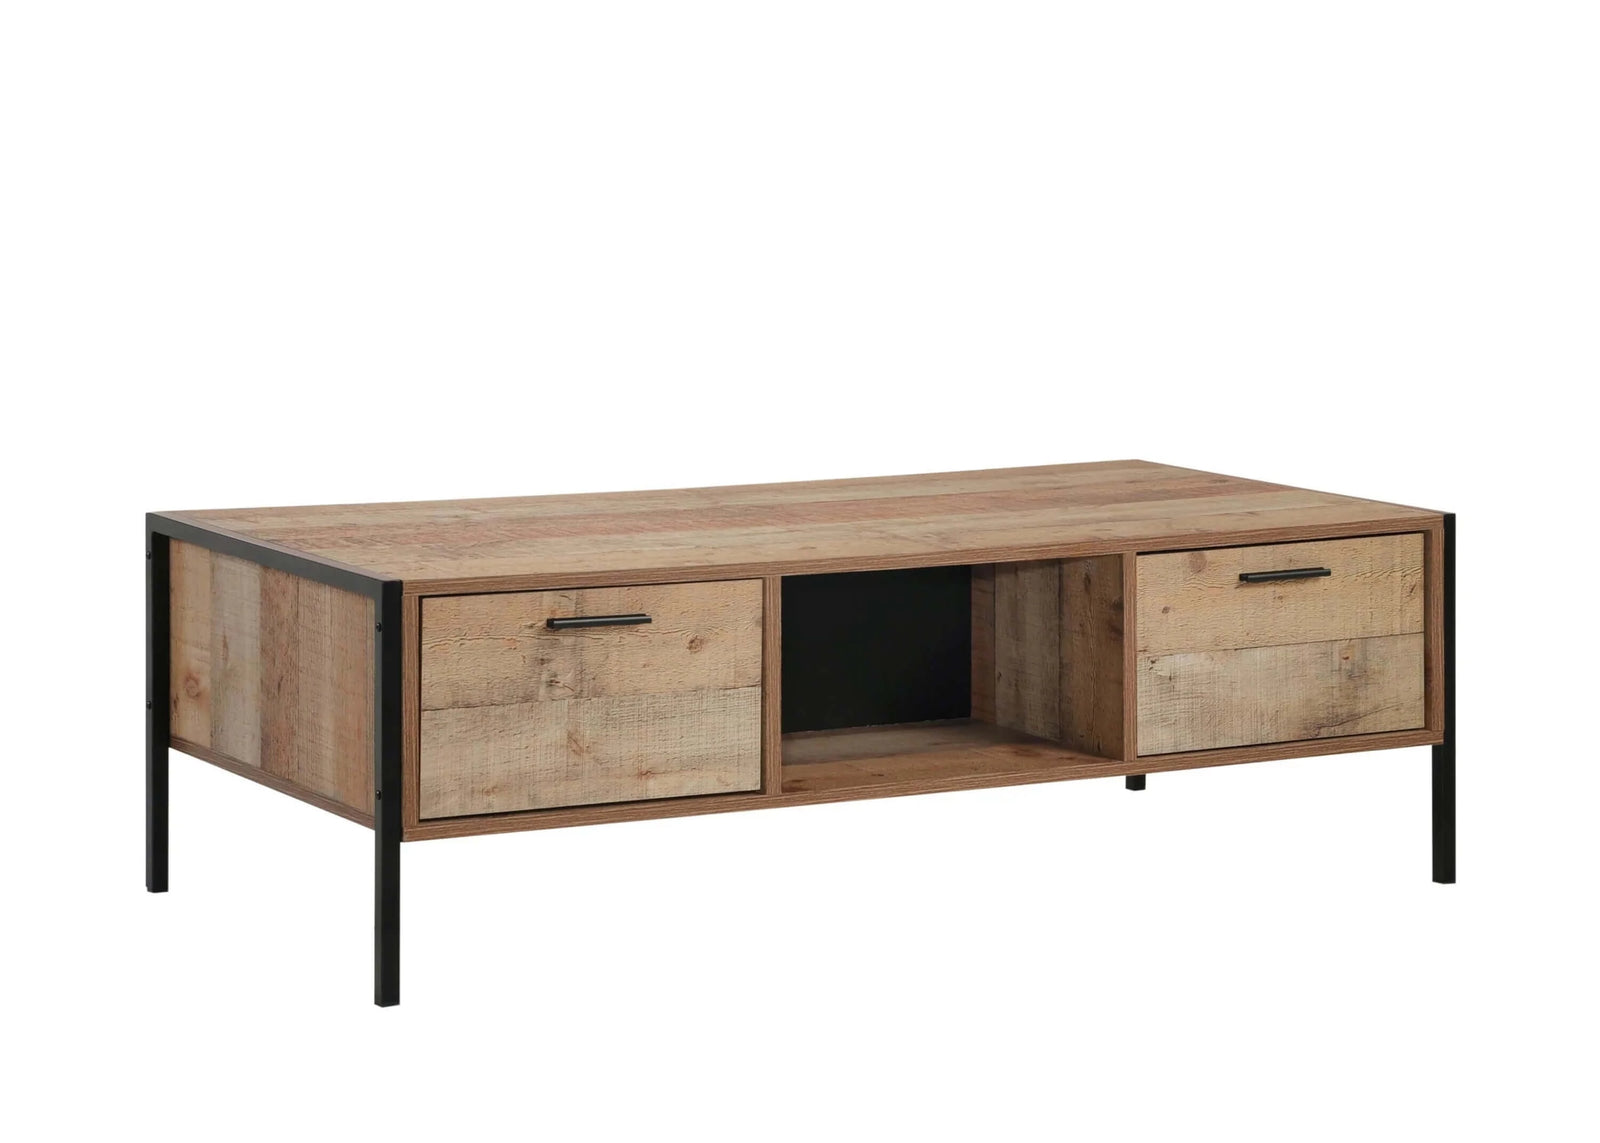 Oak Coffee Table with 2 Drawers & Storage-Upinteriors